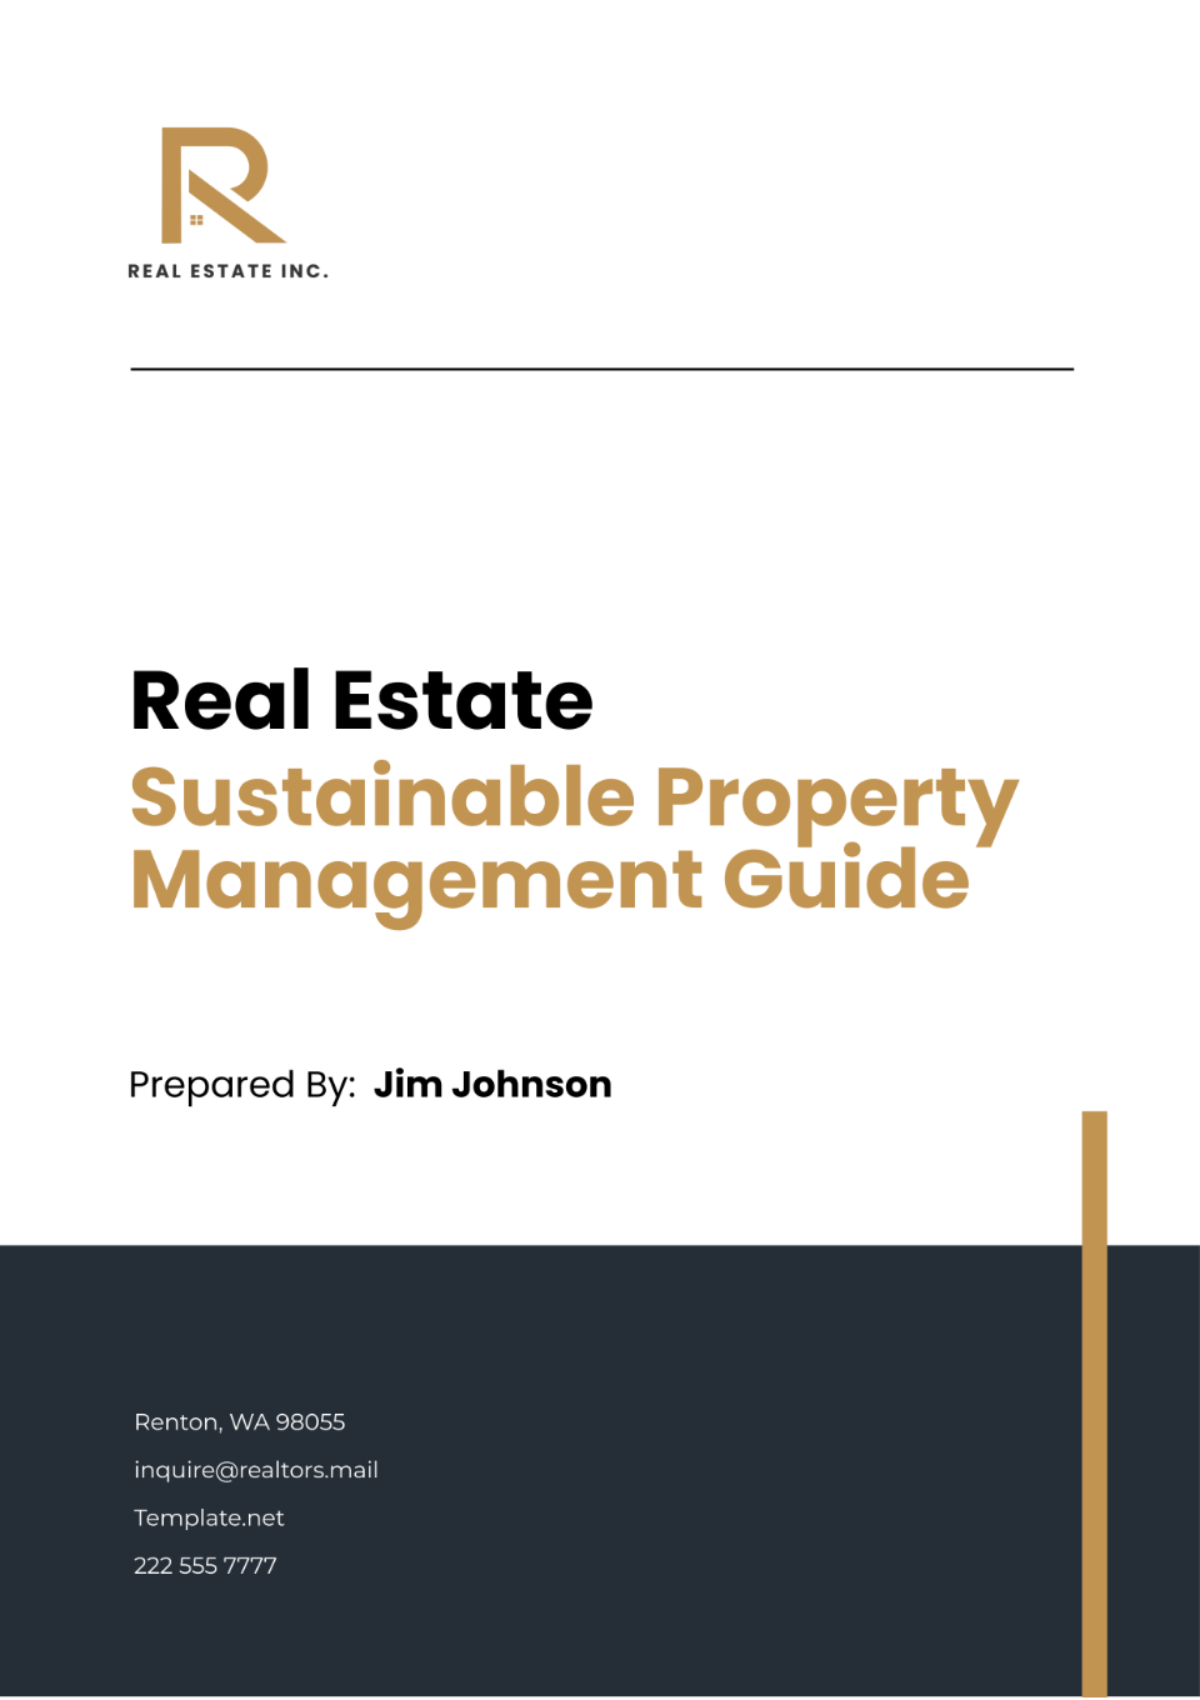 Real Estate Sustainable Property Management Guide Template